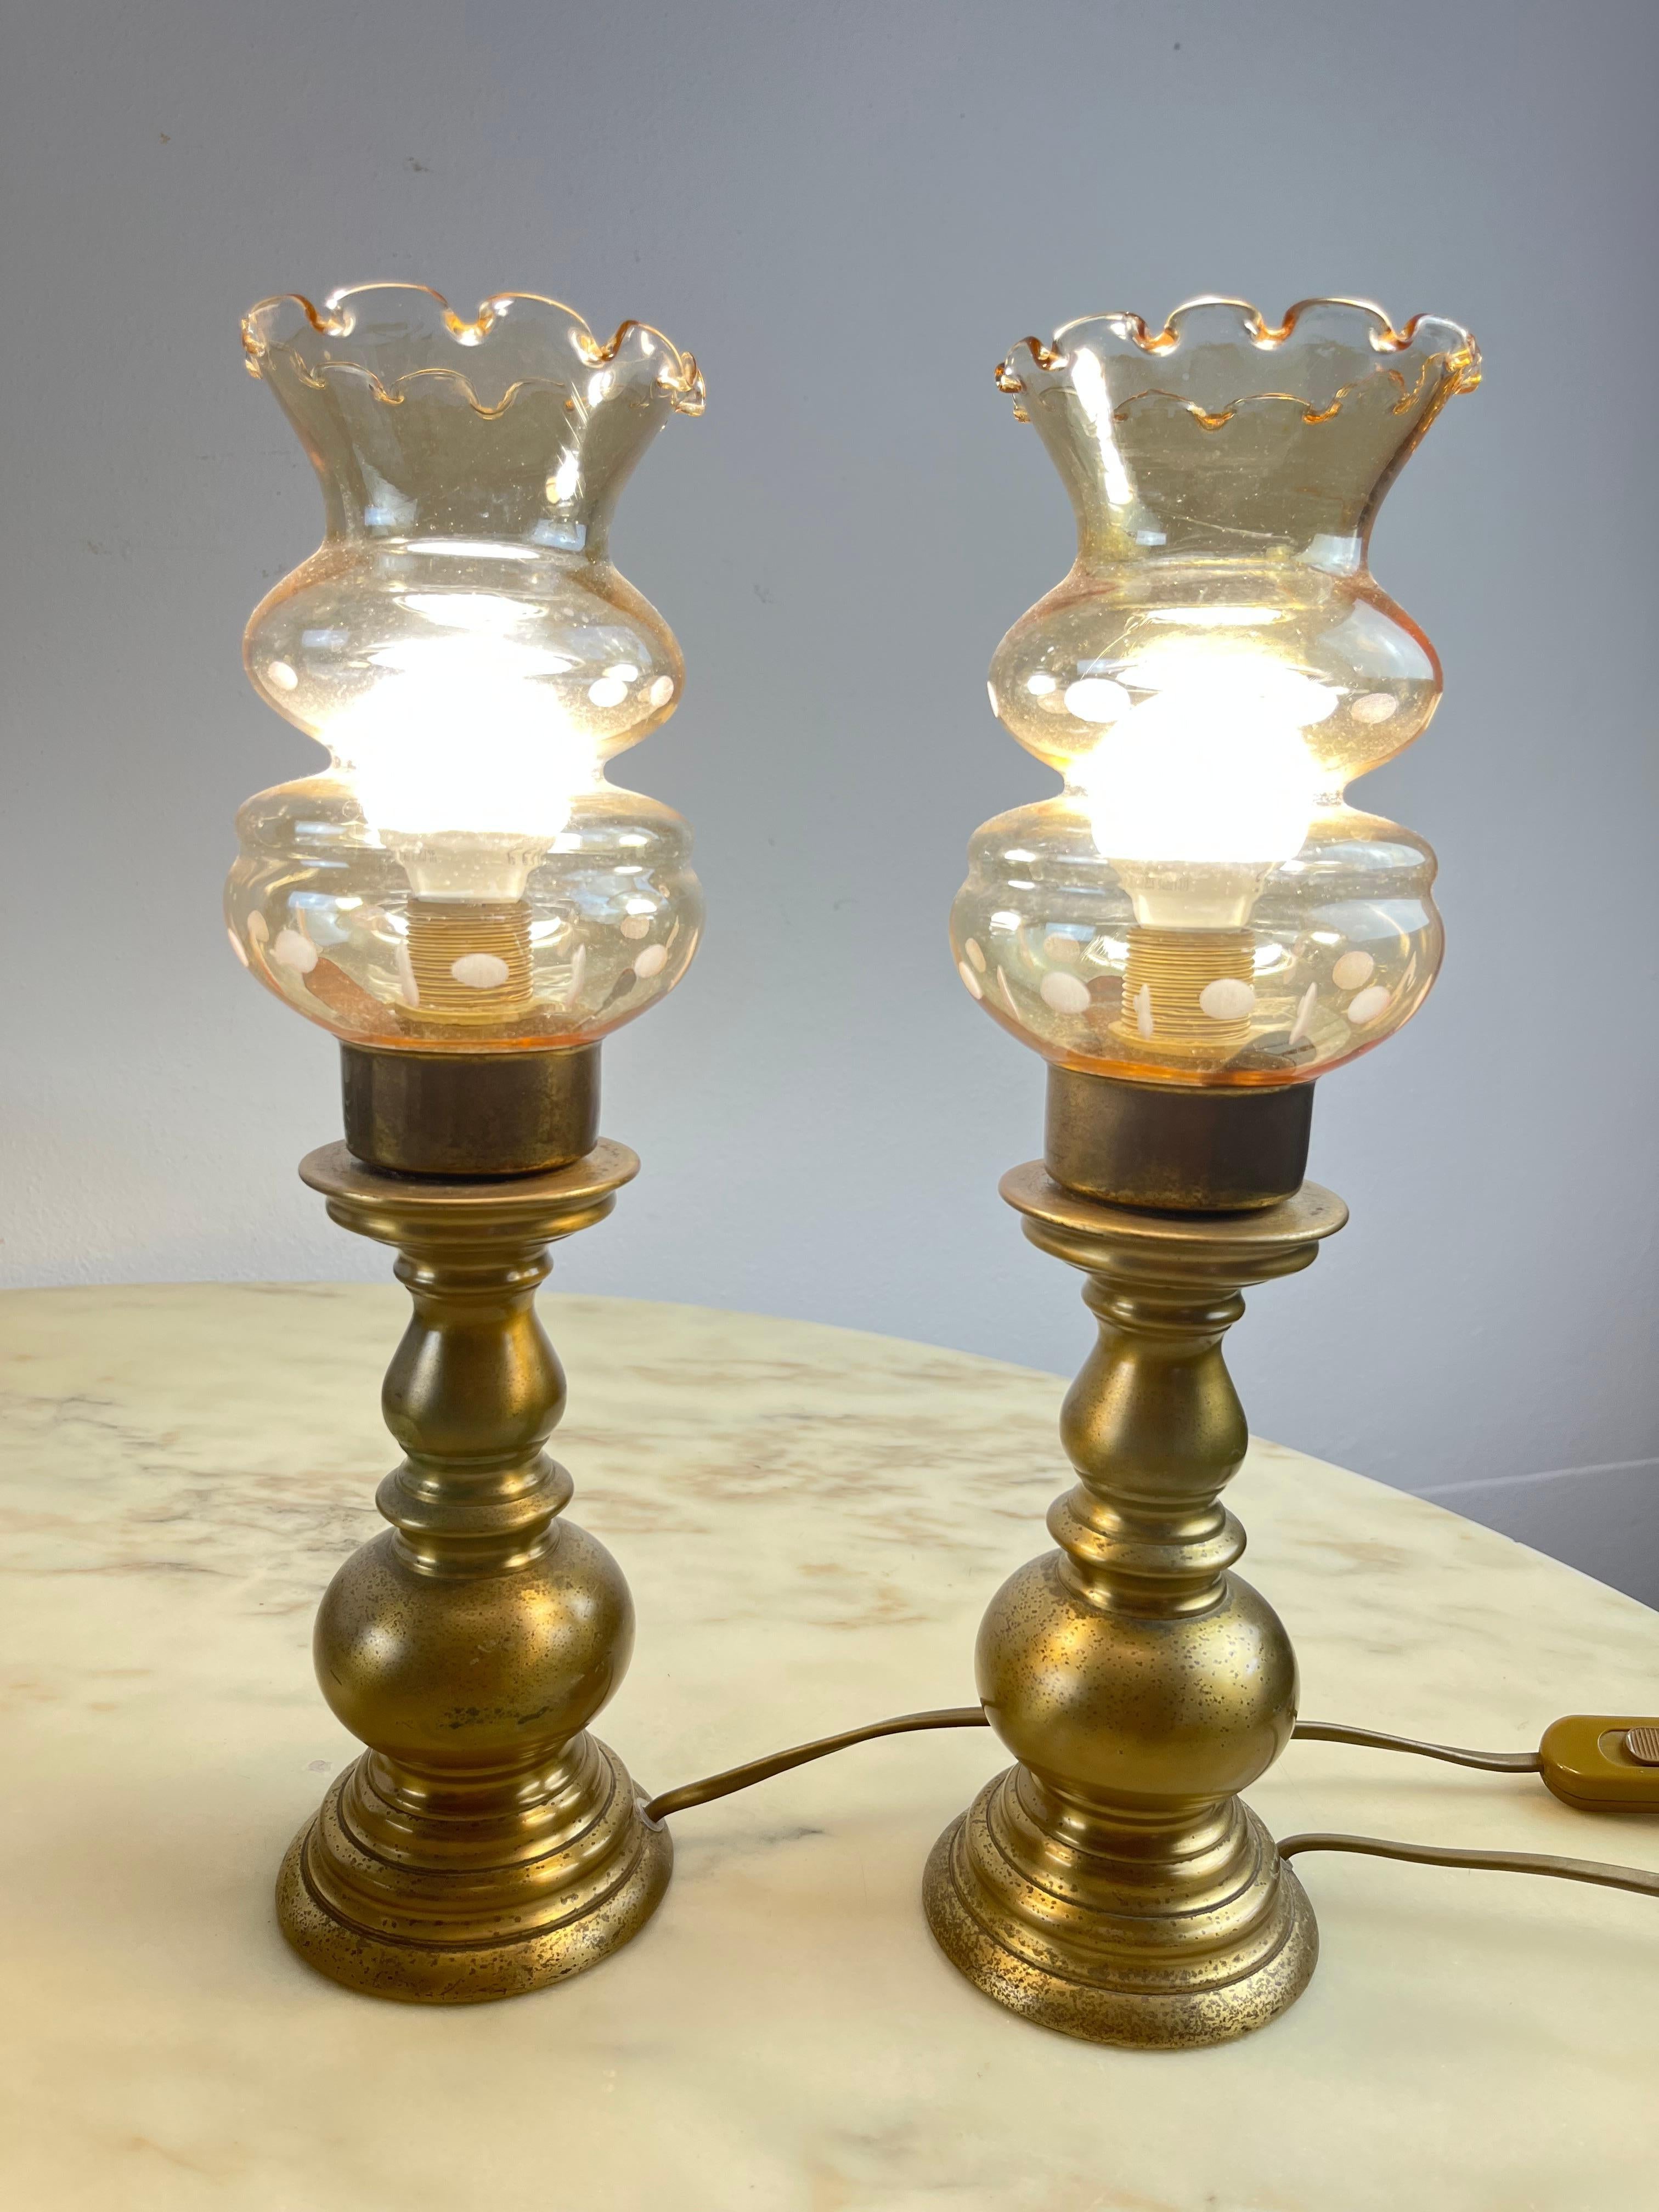 Pair of bedside table lamps, brass and glass, Italy, 80s
Small signs of wear on the metal parts, they are functional.

We guarantee adequate packaging and will ship via DHL, insuring the contents against any breakage or loss of the package.